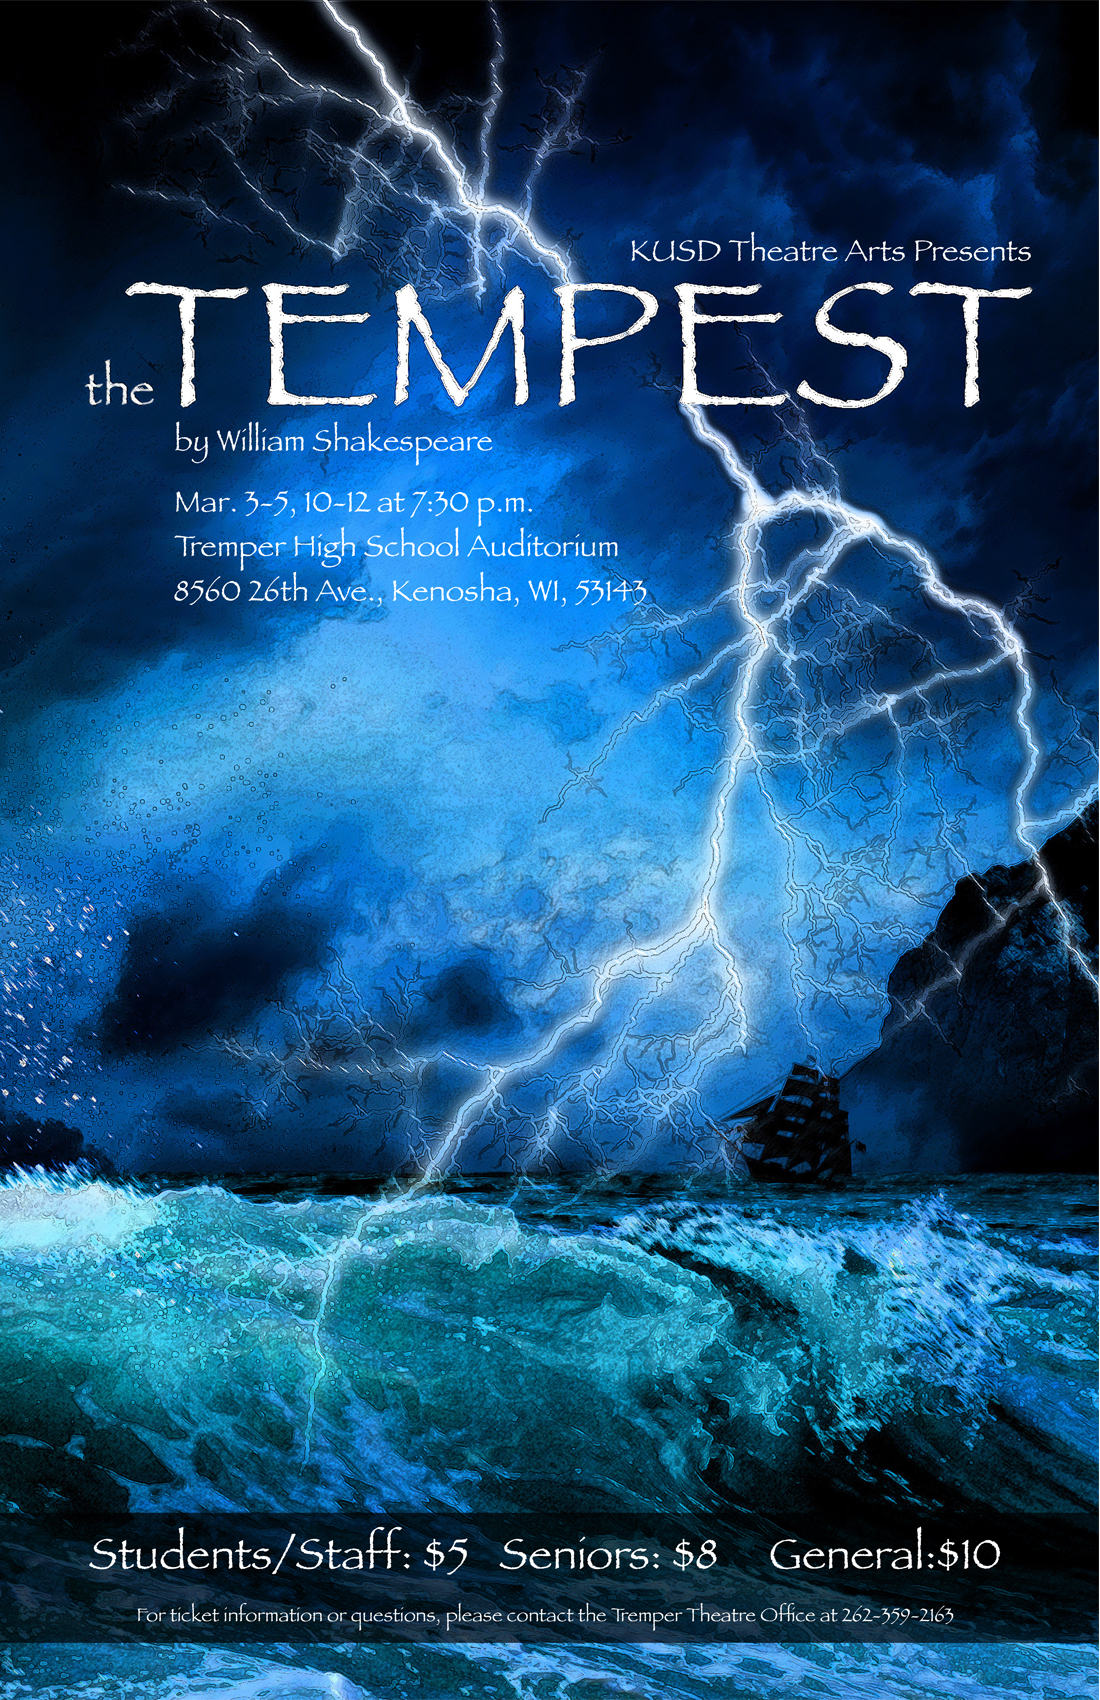 The poster for The Tempest